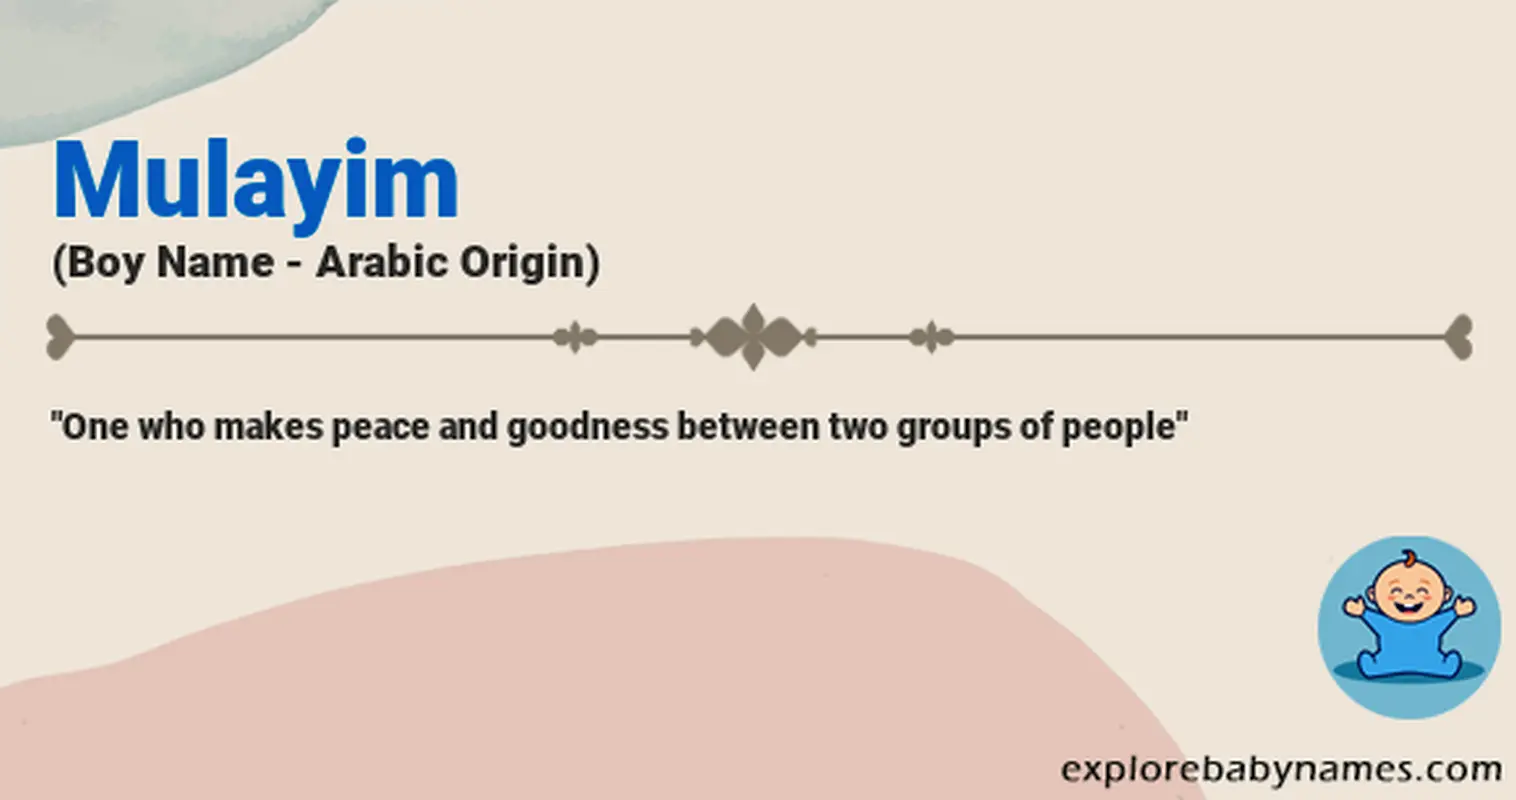 Meaning of Mulayim